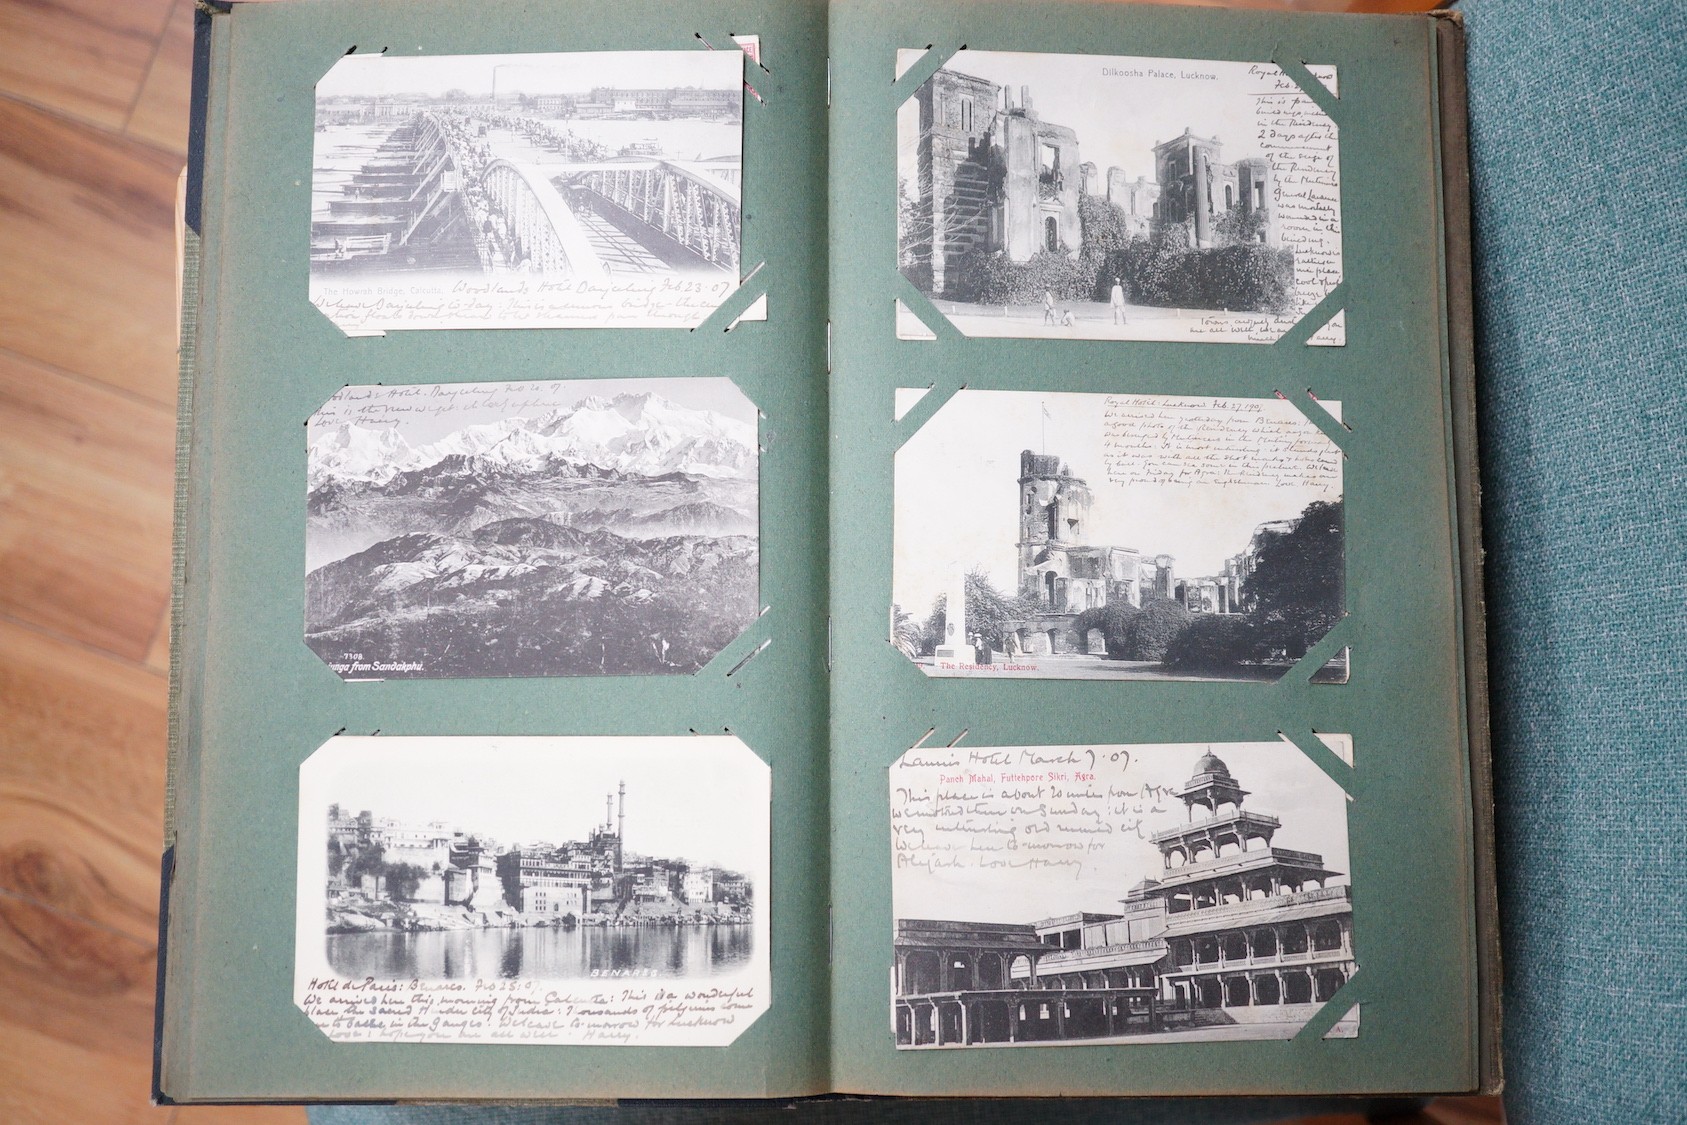 An Edwardian Postcard album collected and mainly received by Muriel MacGeagh following a World tour by her brother, Col. Sir Henry F. MacGeagh and an unknown companion, during 1906, including views of some of the worlds